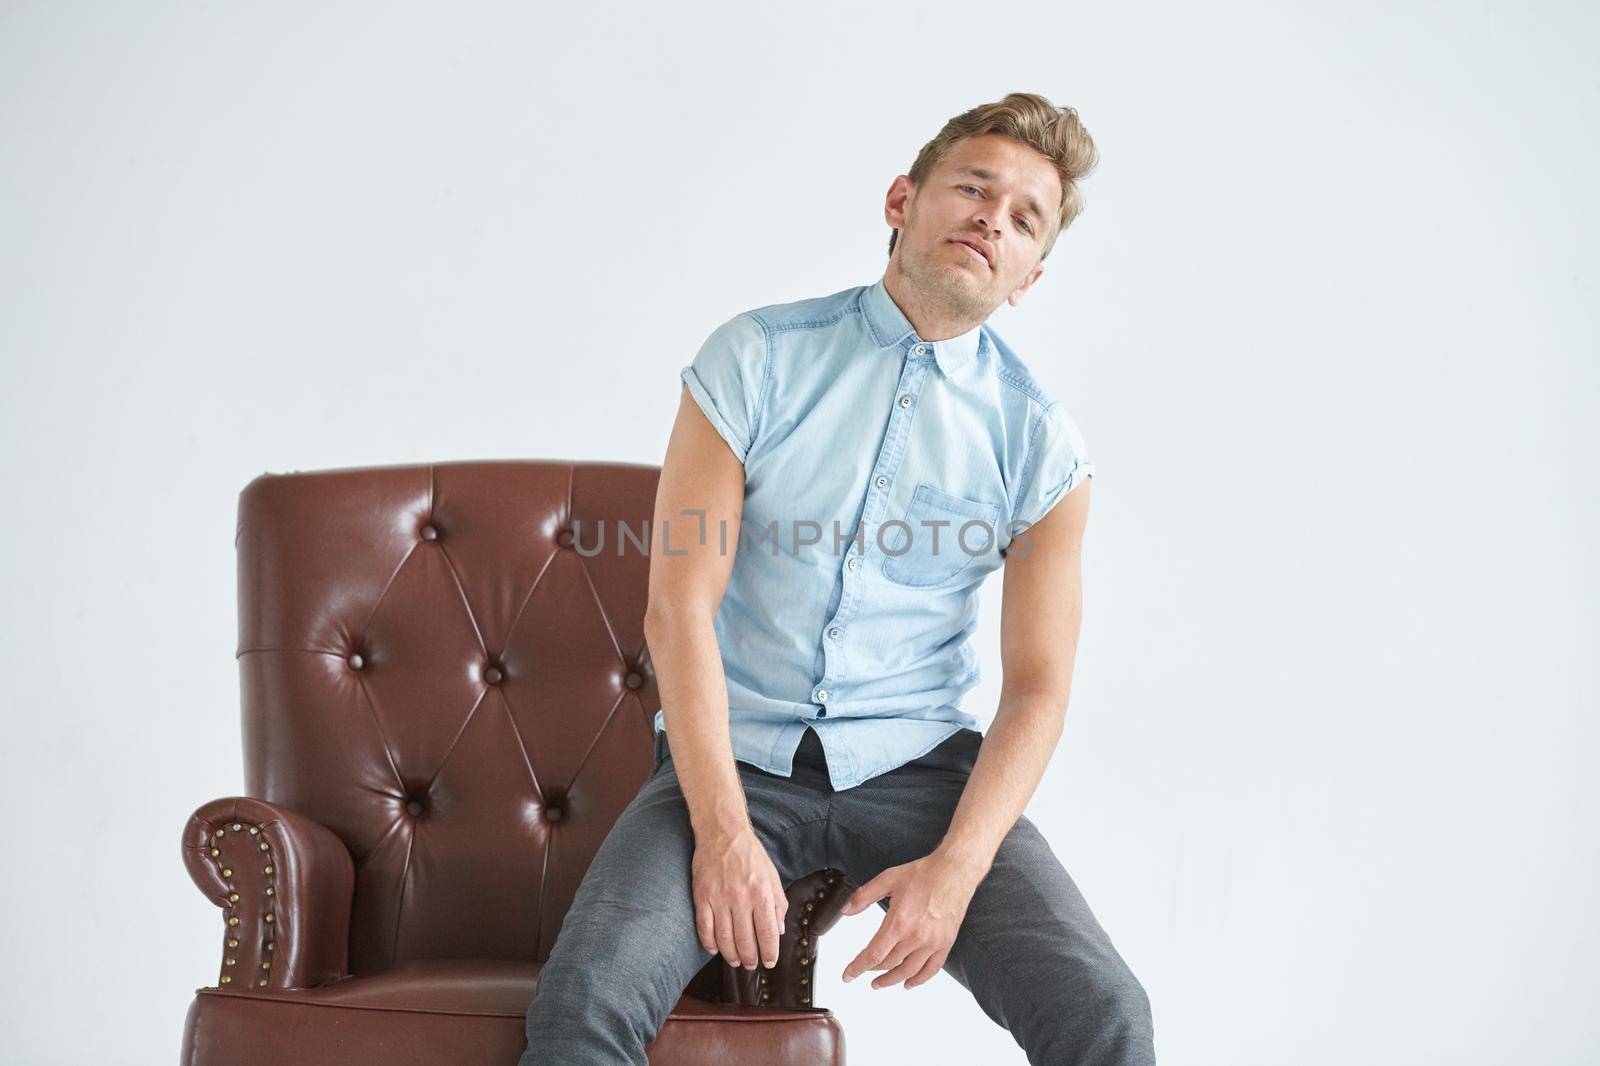 Portrait of a stylish intelligent man, small unshaven, charismatic, blue shirt, sitting on a brown leather chair, dialog, negotiation, short sleeve, brutal, hairstyle, emotions, indifference, fatigue. High quality photo